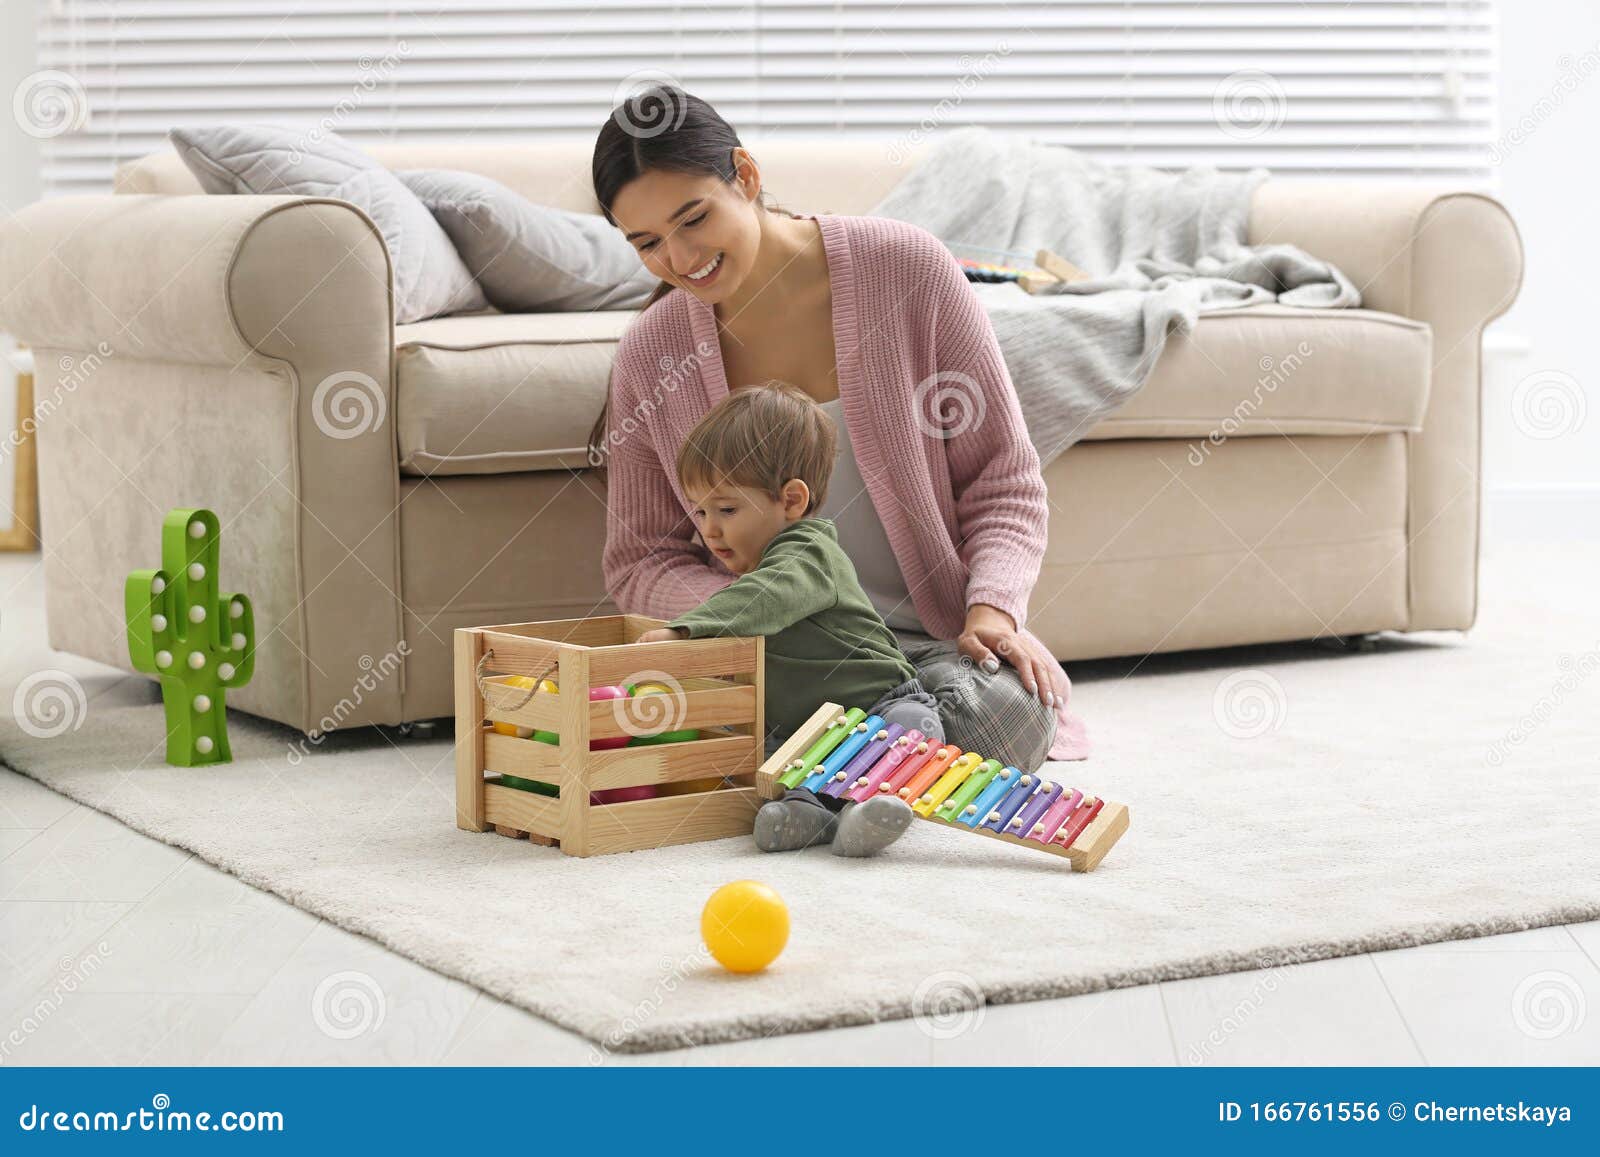 young nanny and cute little baby playing with toys